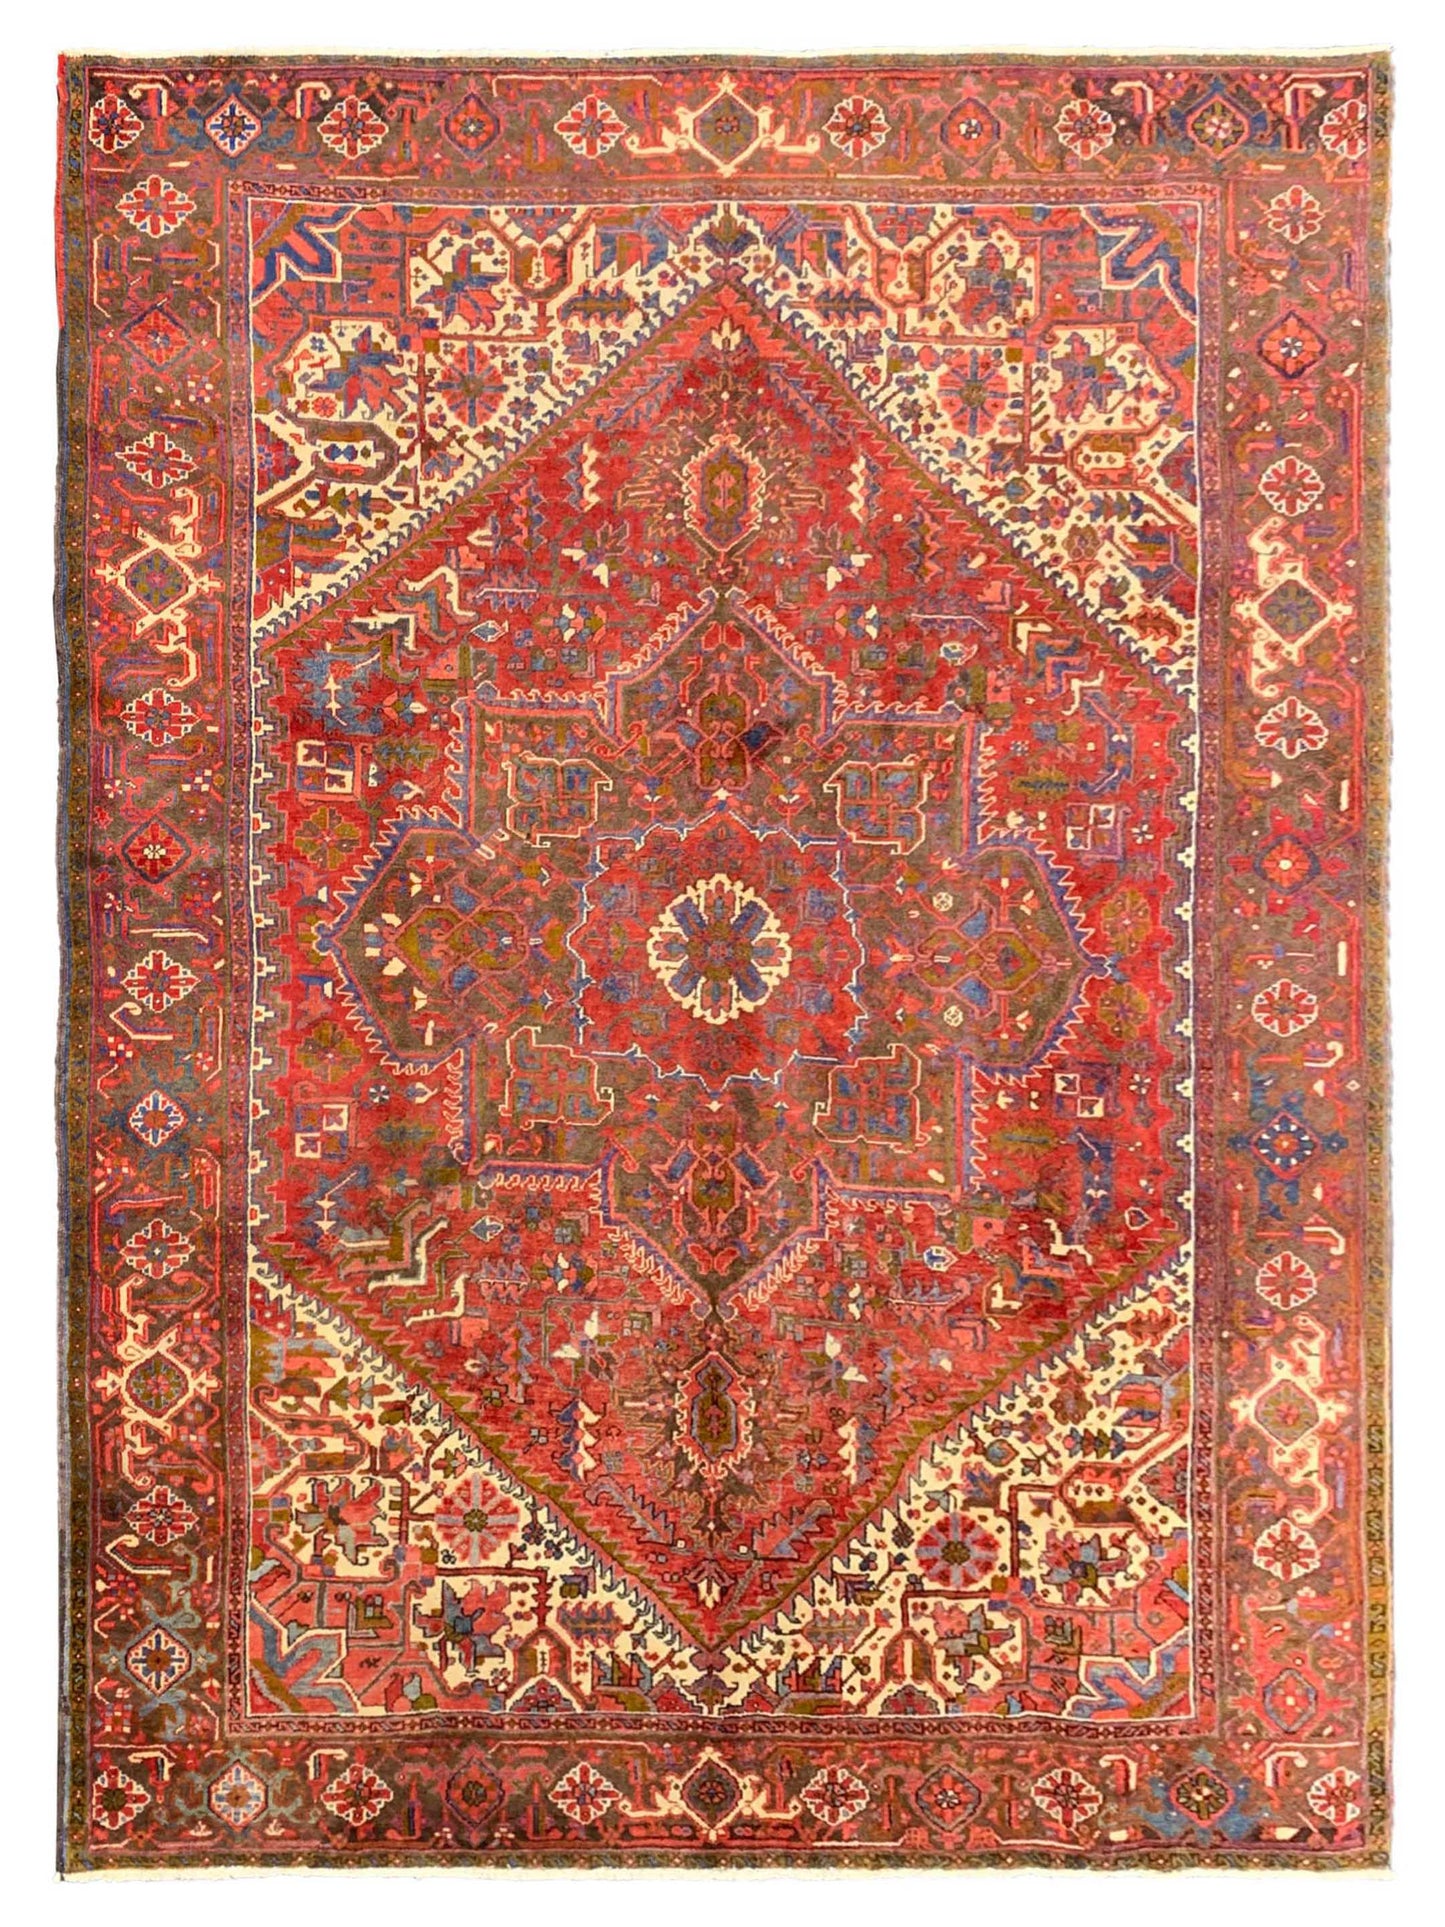 Artisan Persian Traditions 305737 Red Traditional Knotted Rug